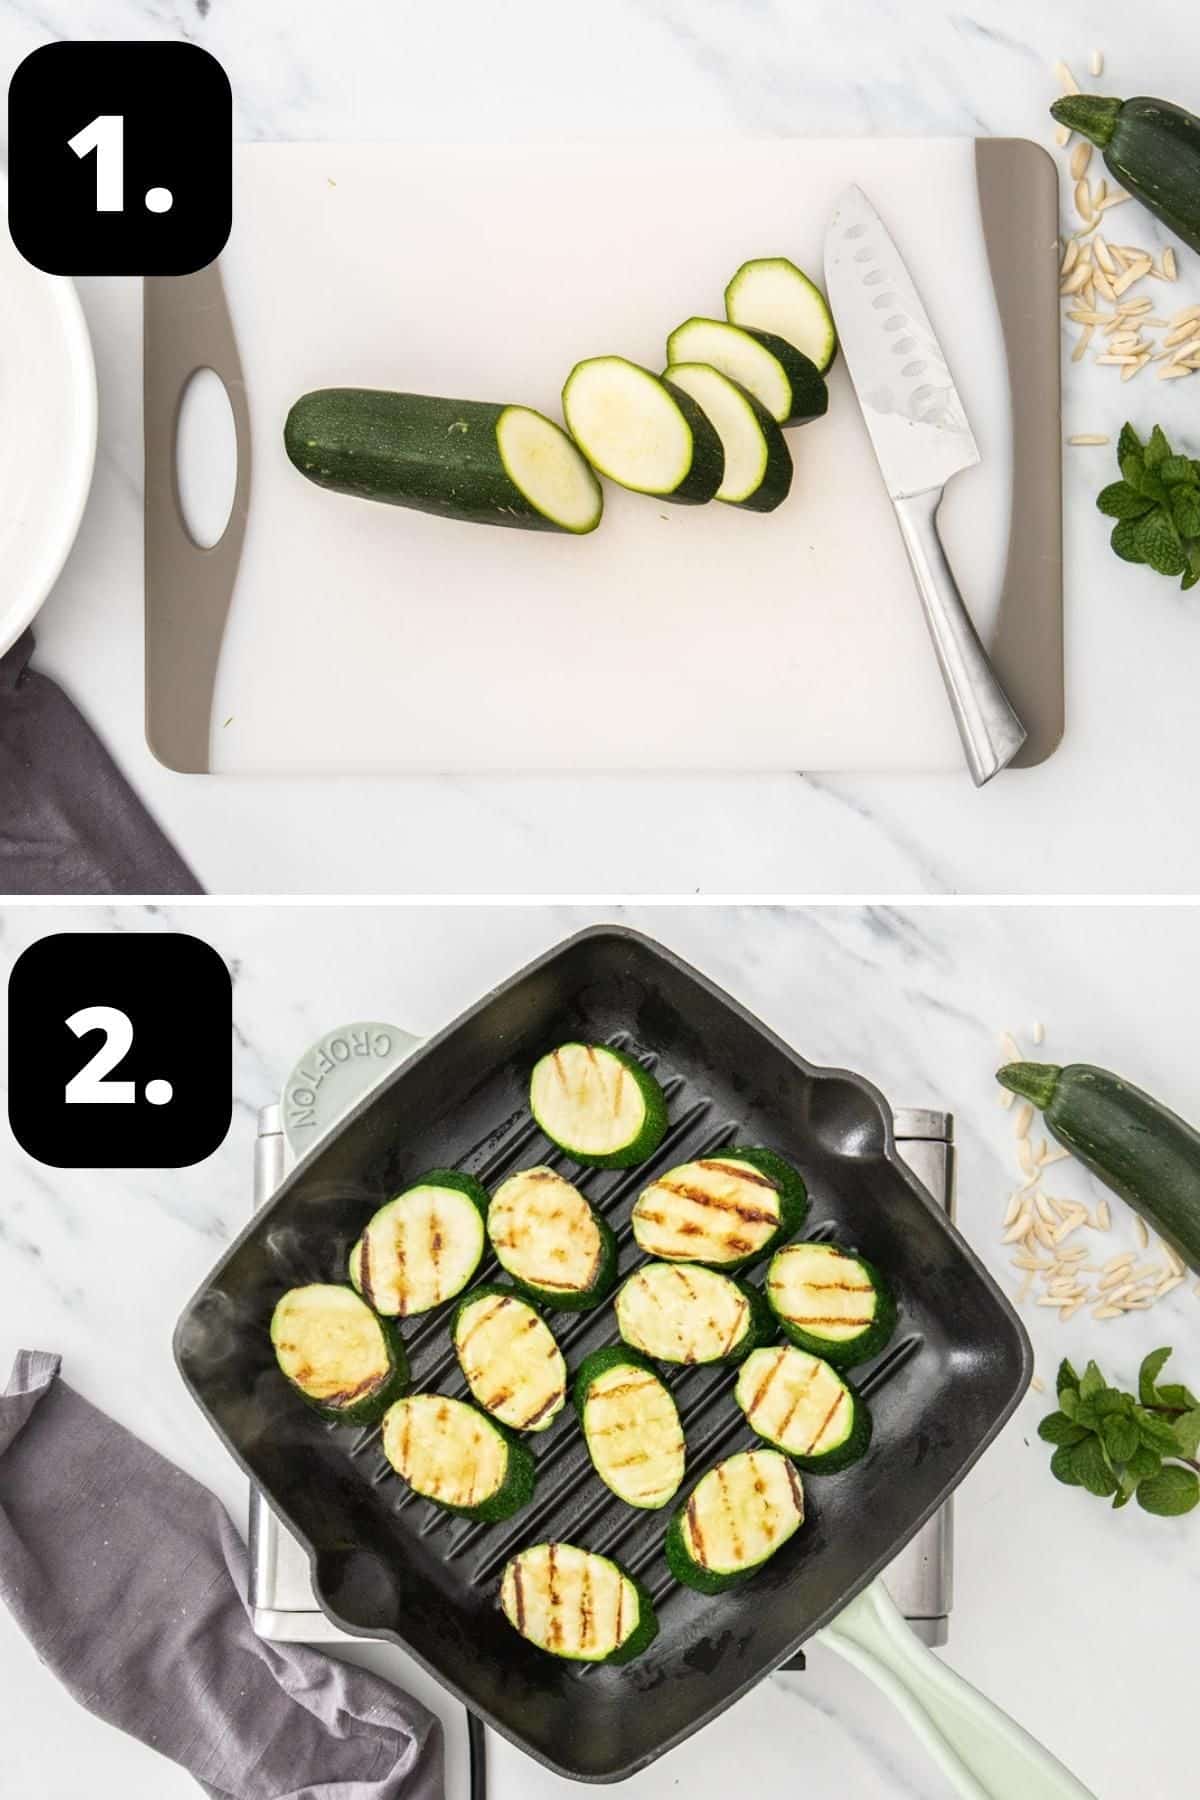 Steps 1-2 of preparing this recipe - slicing the zucchini on a chopping board and grilling it in a grill pan.